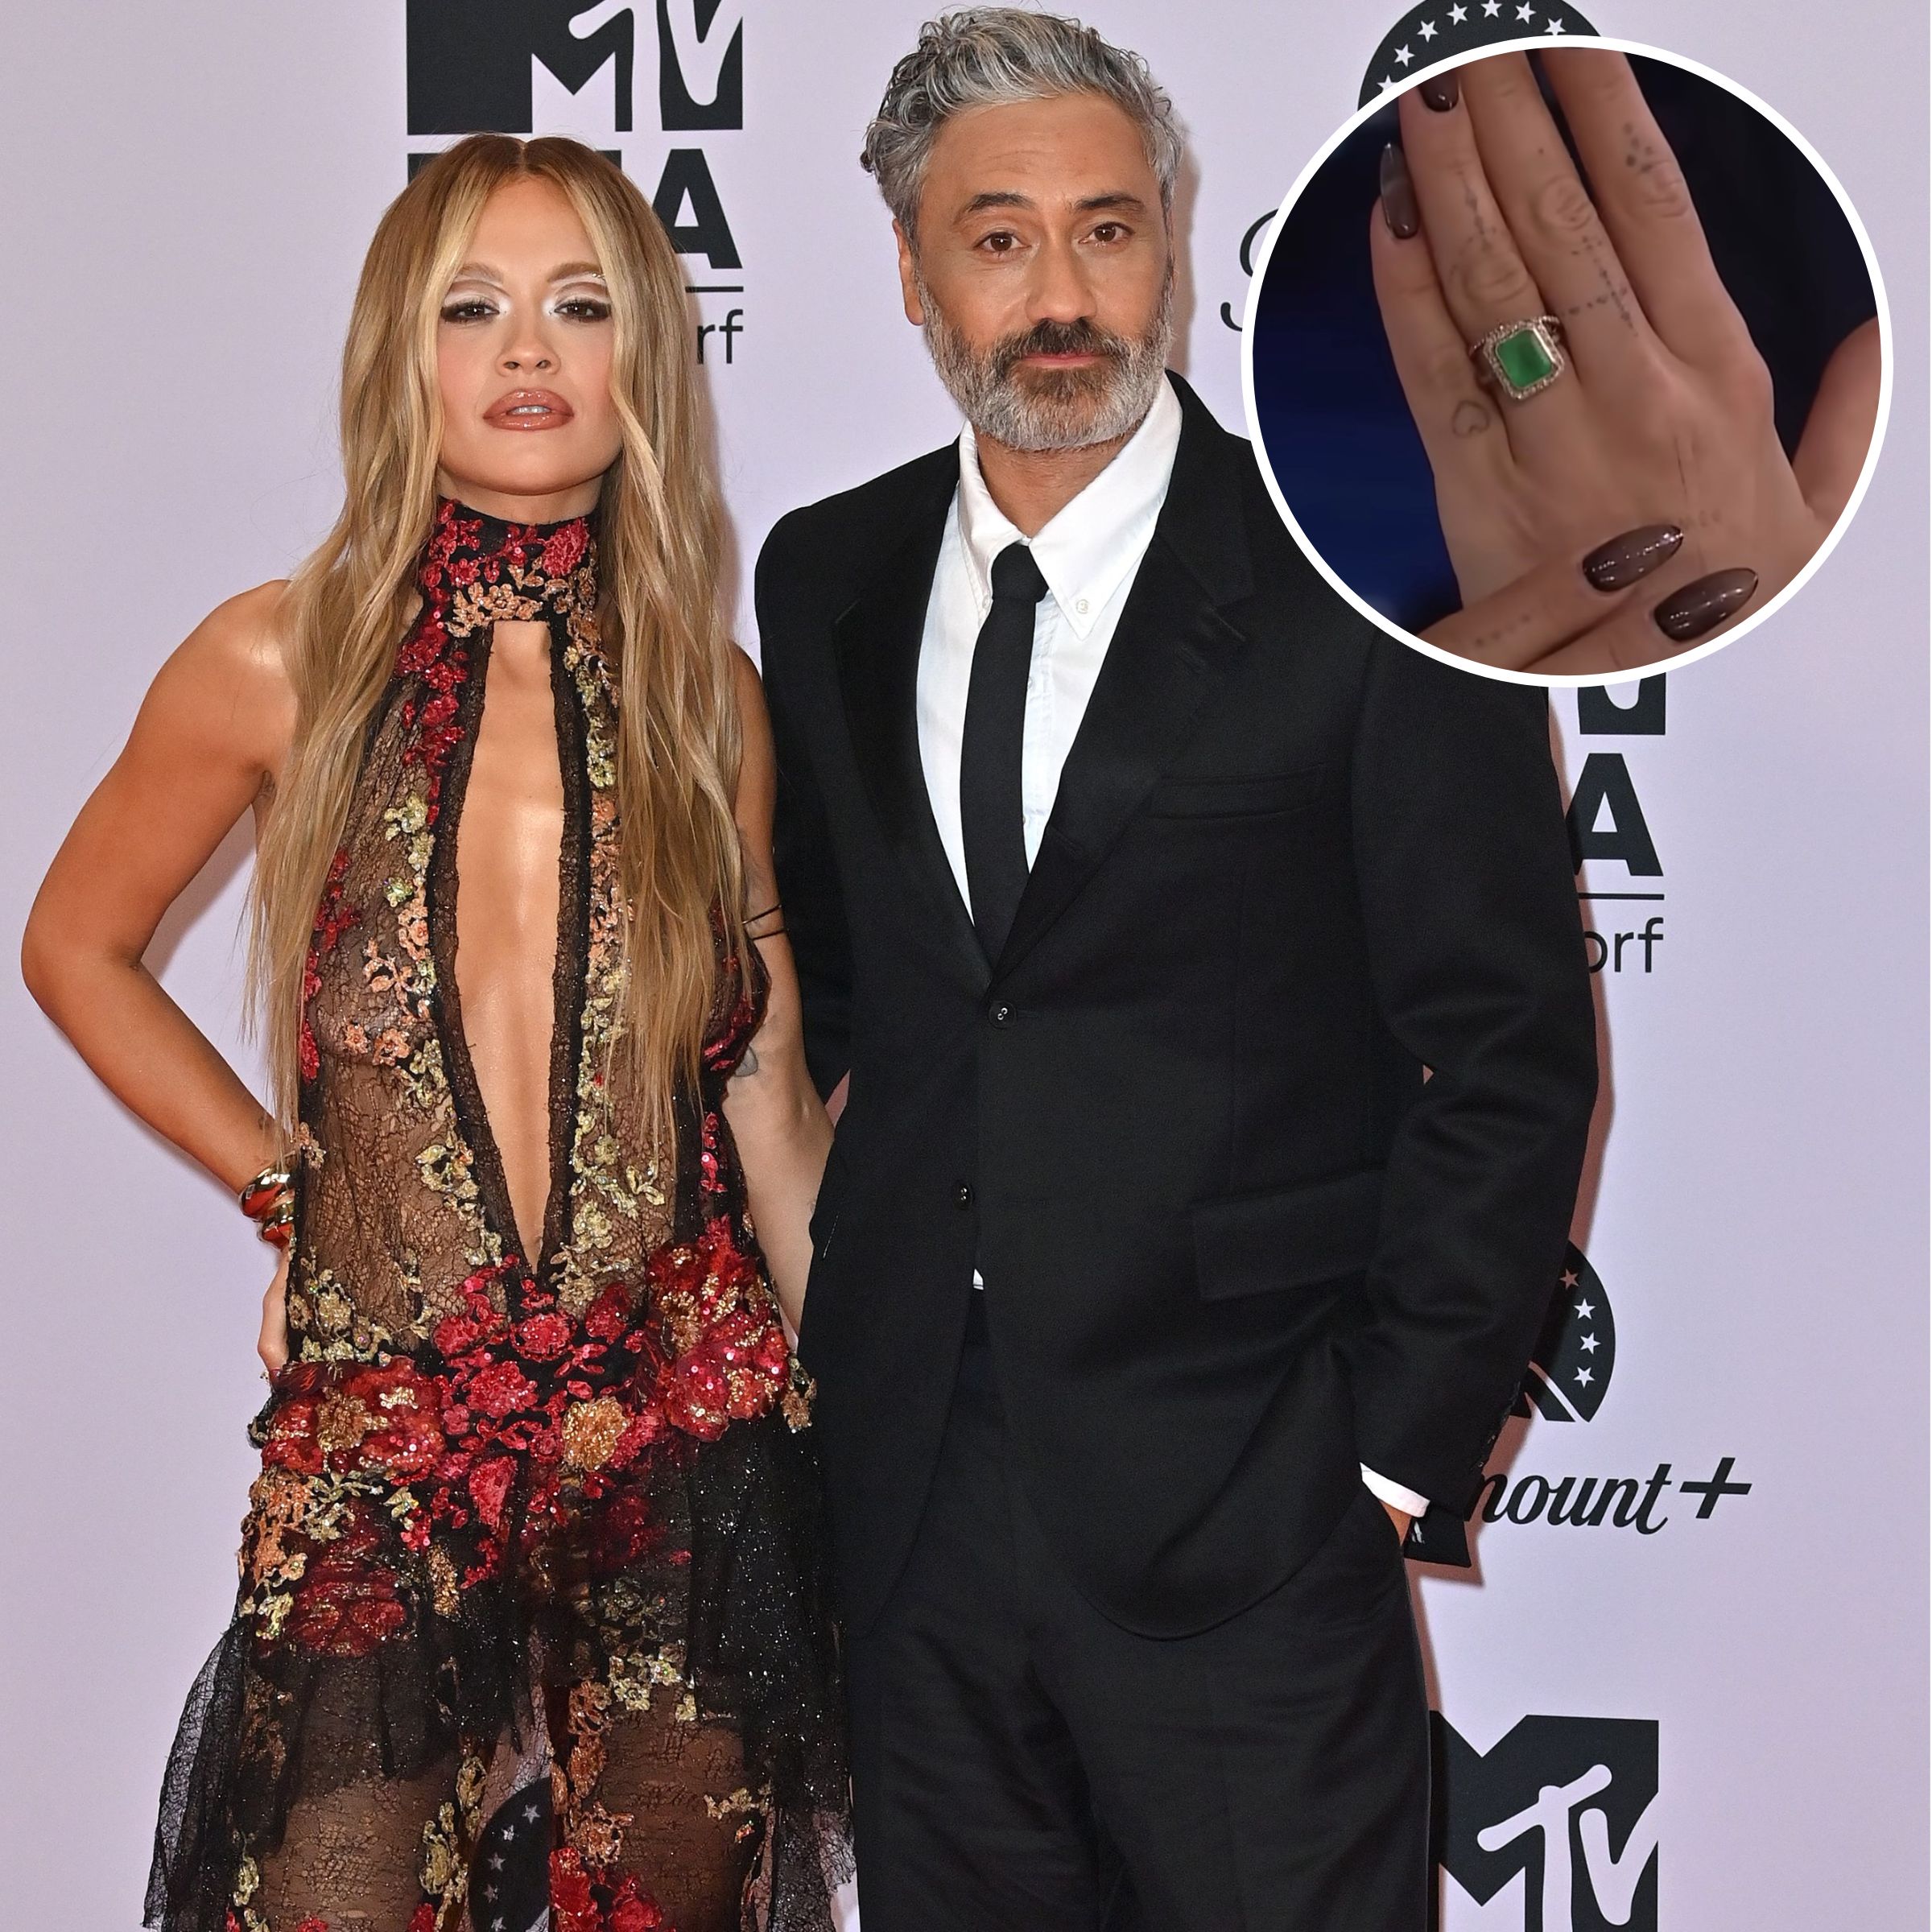 Dazzlers! The Most Gorgeous Celebrity Engagement Rings of 2023: See Photos, Cuts, Carats, More